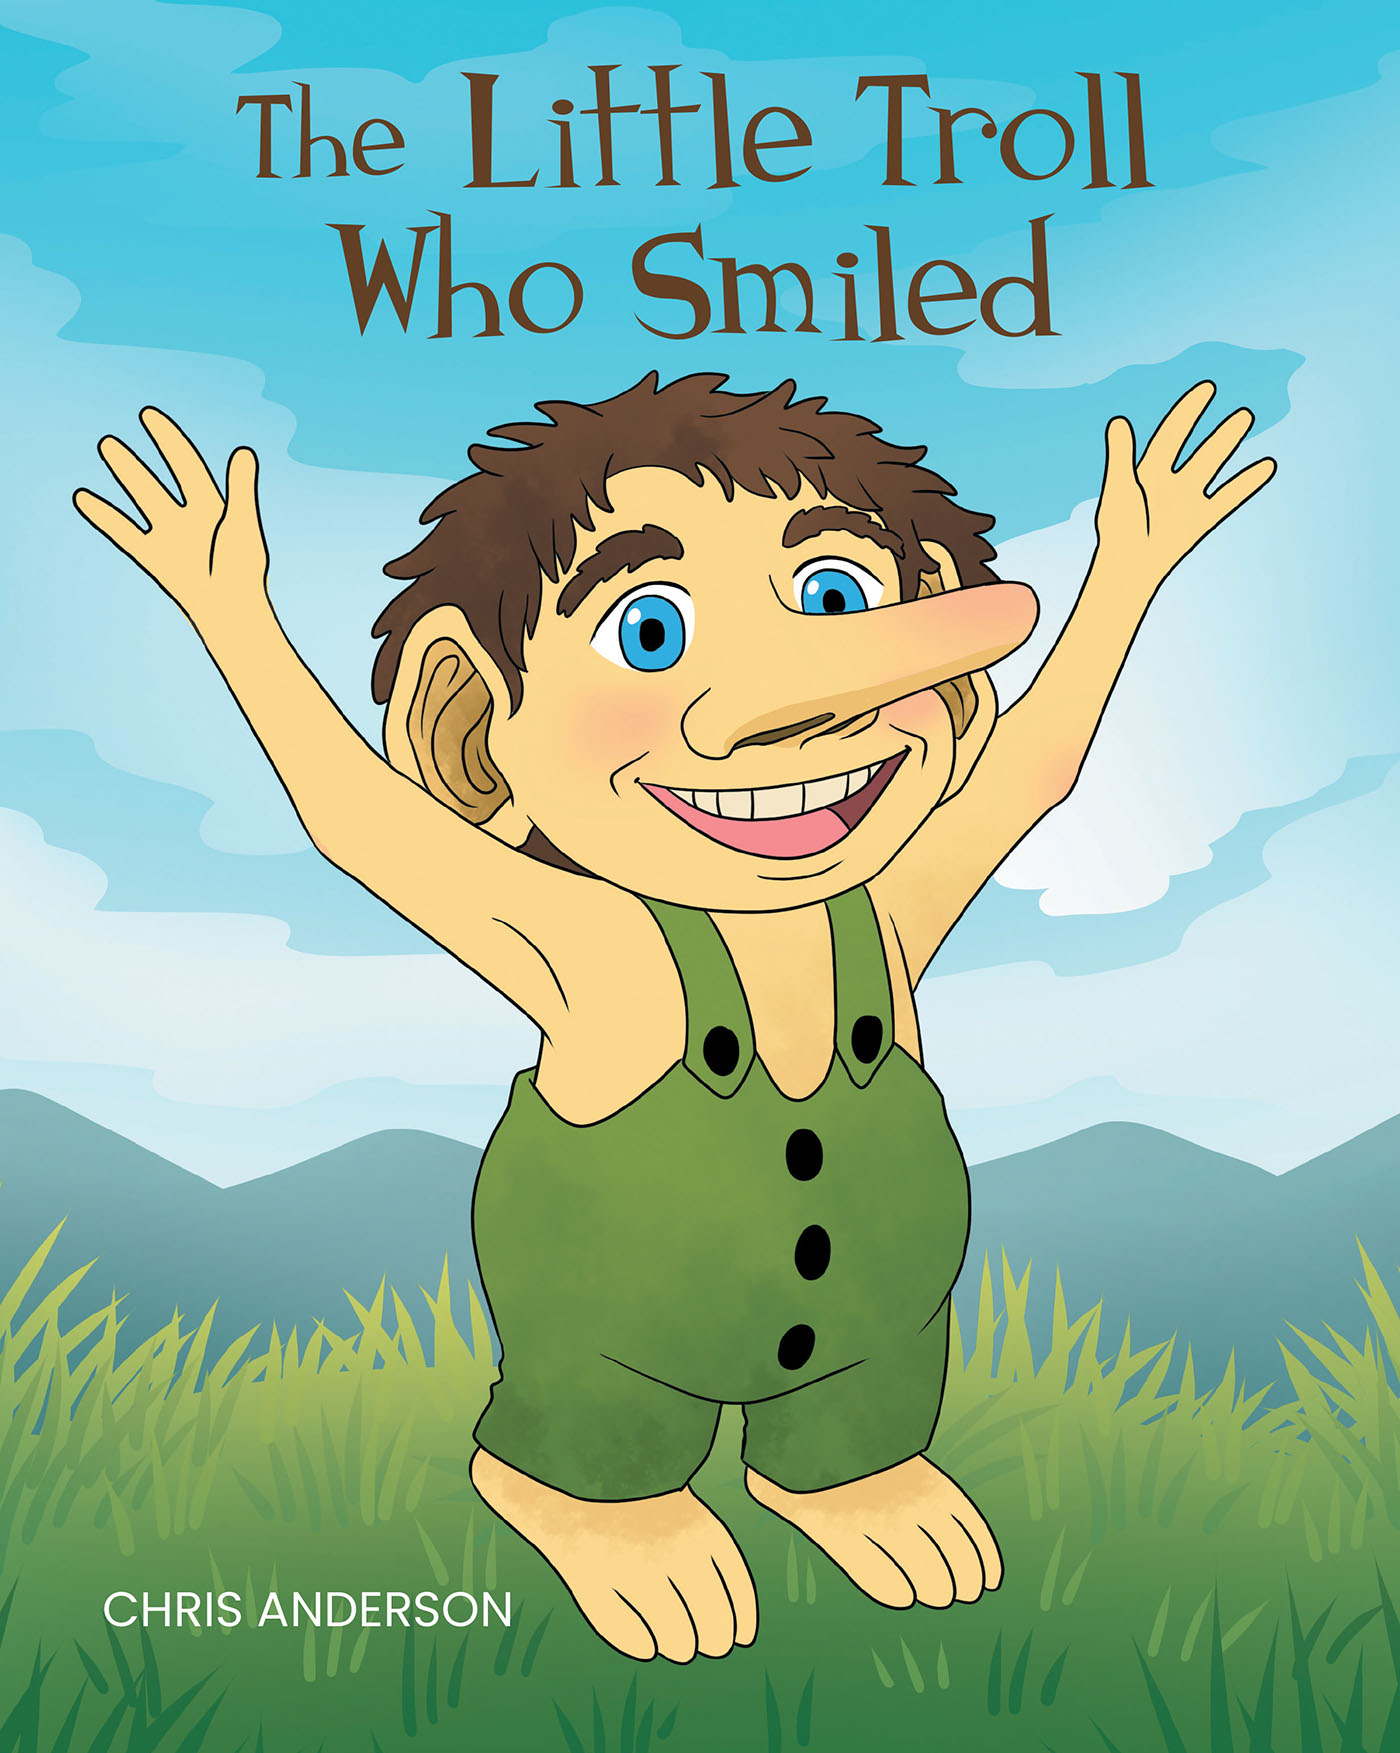 Author Chris Anderson’s New Book, "The Little Troll Who Smiled," is a Poignant Story About Learning to Accept Others Even if They Look a Bit Different from Everyone Else